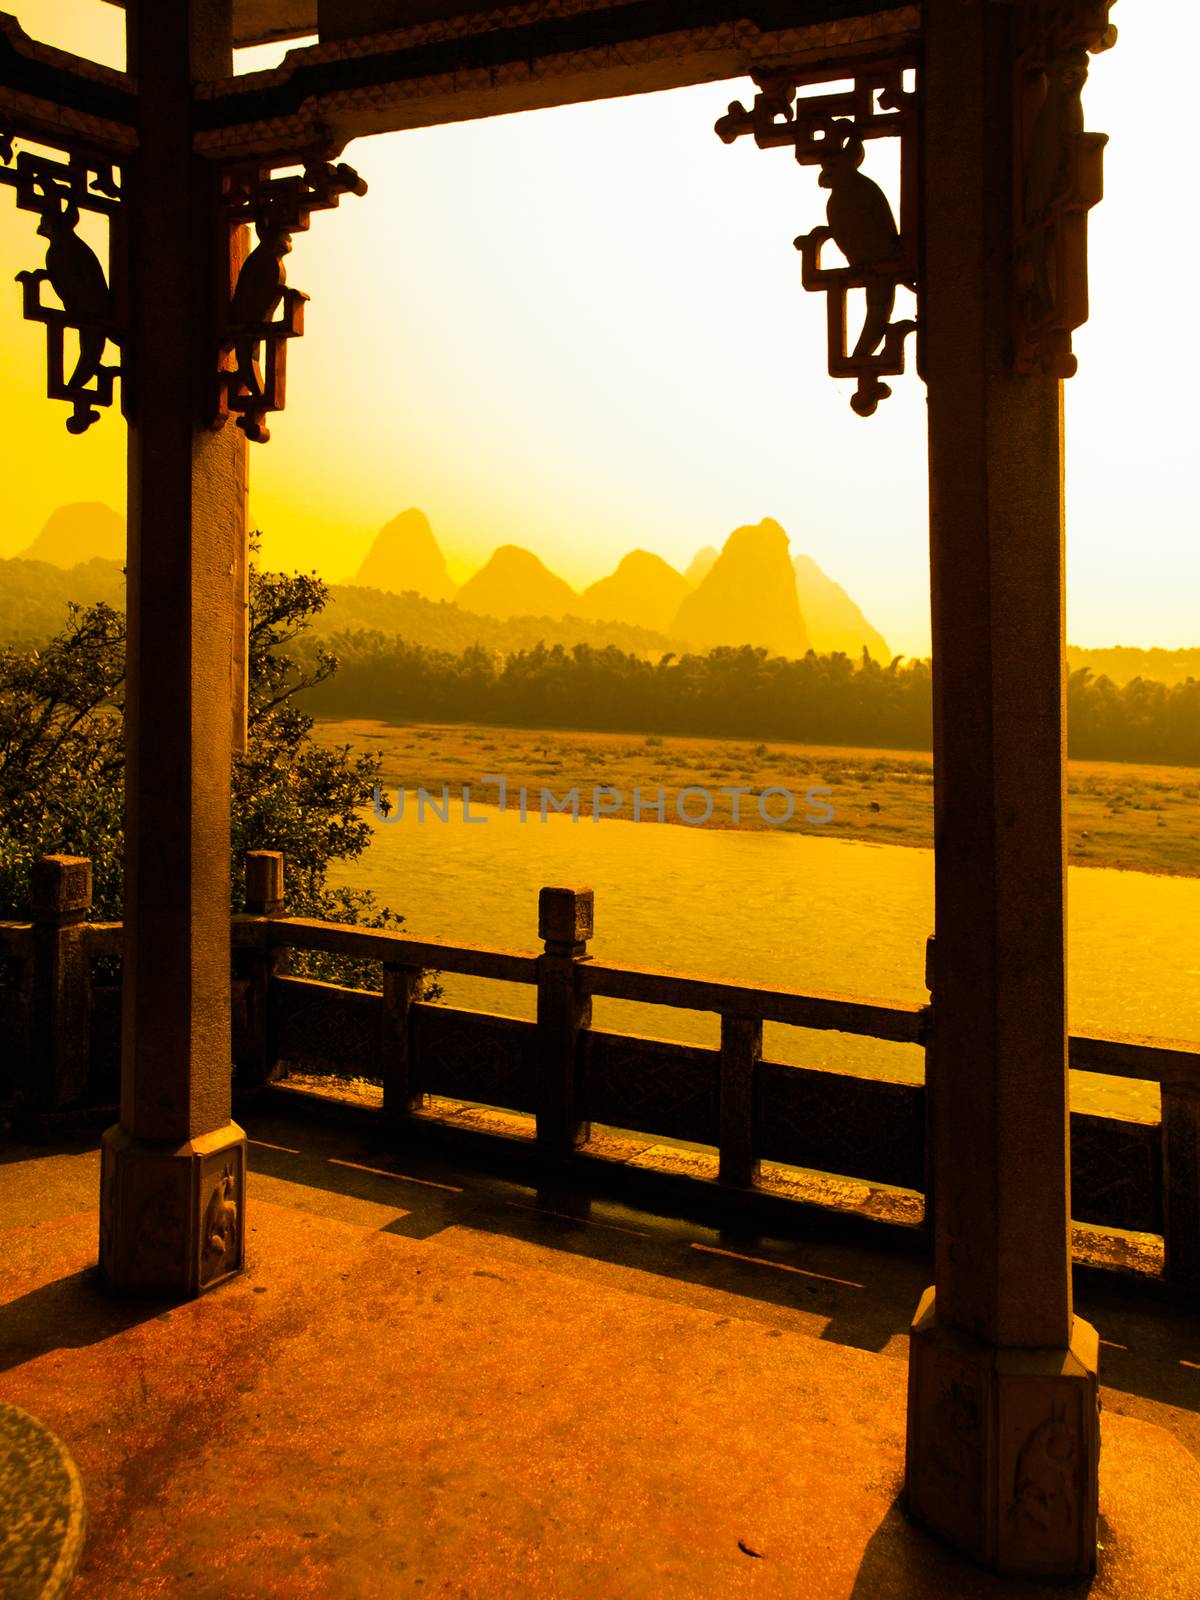 Sunset in karst landscape around Yangshuo an Li River with peaks silhouettes, Guangxi Province, China. View from terrace with ornamental columns.